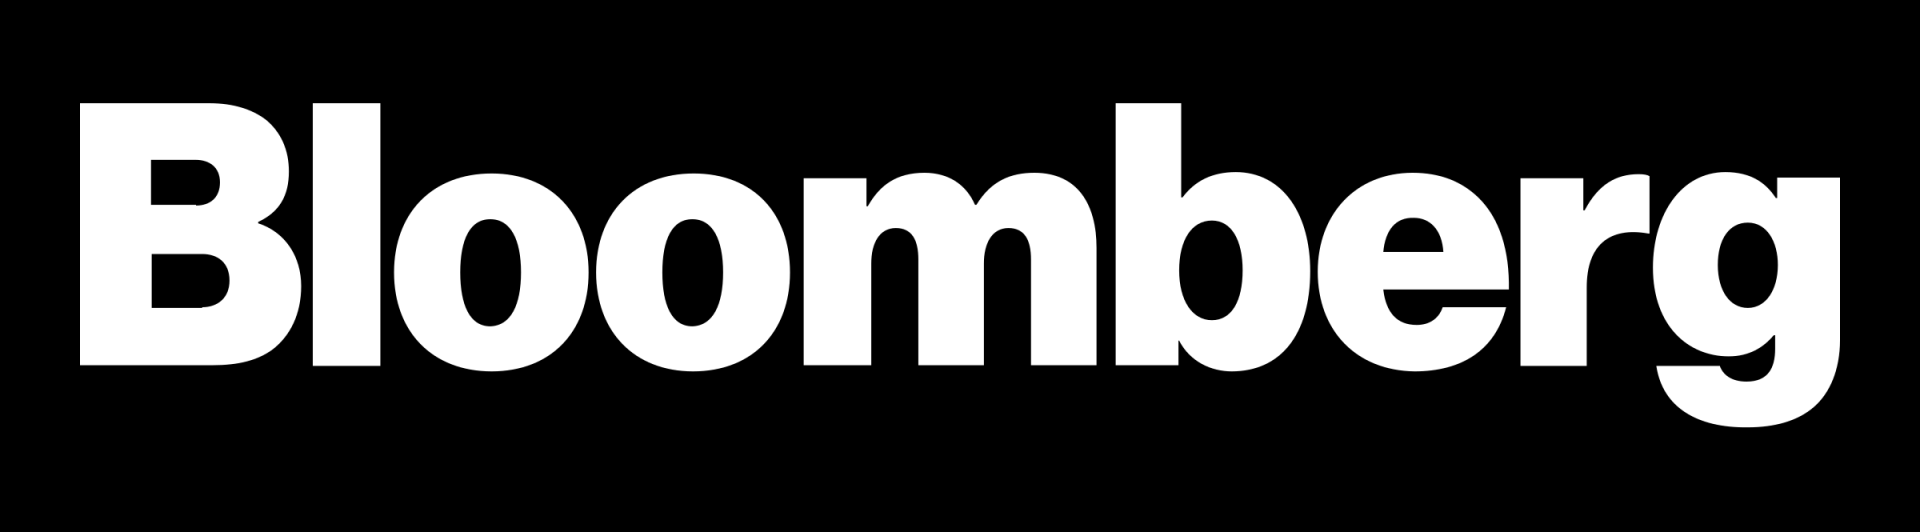 The bloomberg logo is white on a black background.